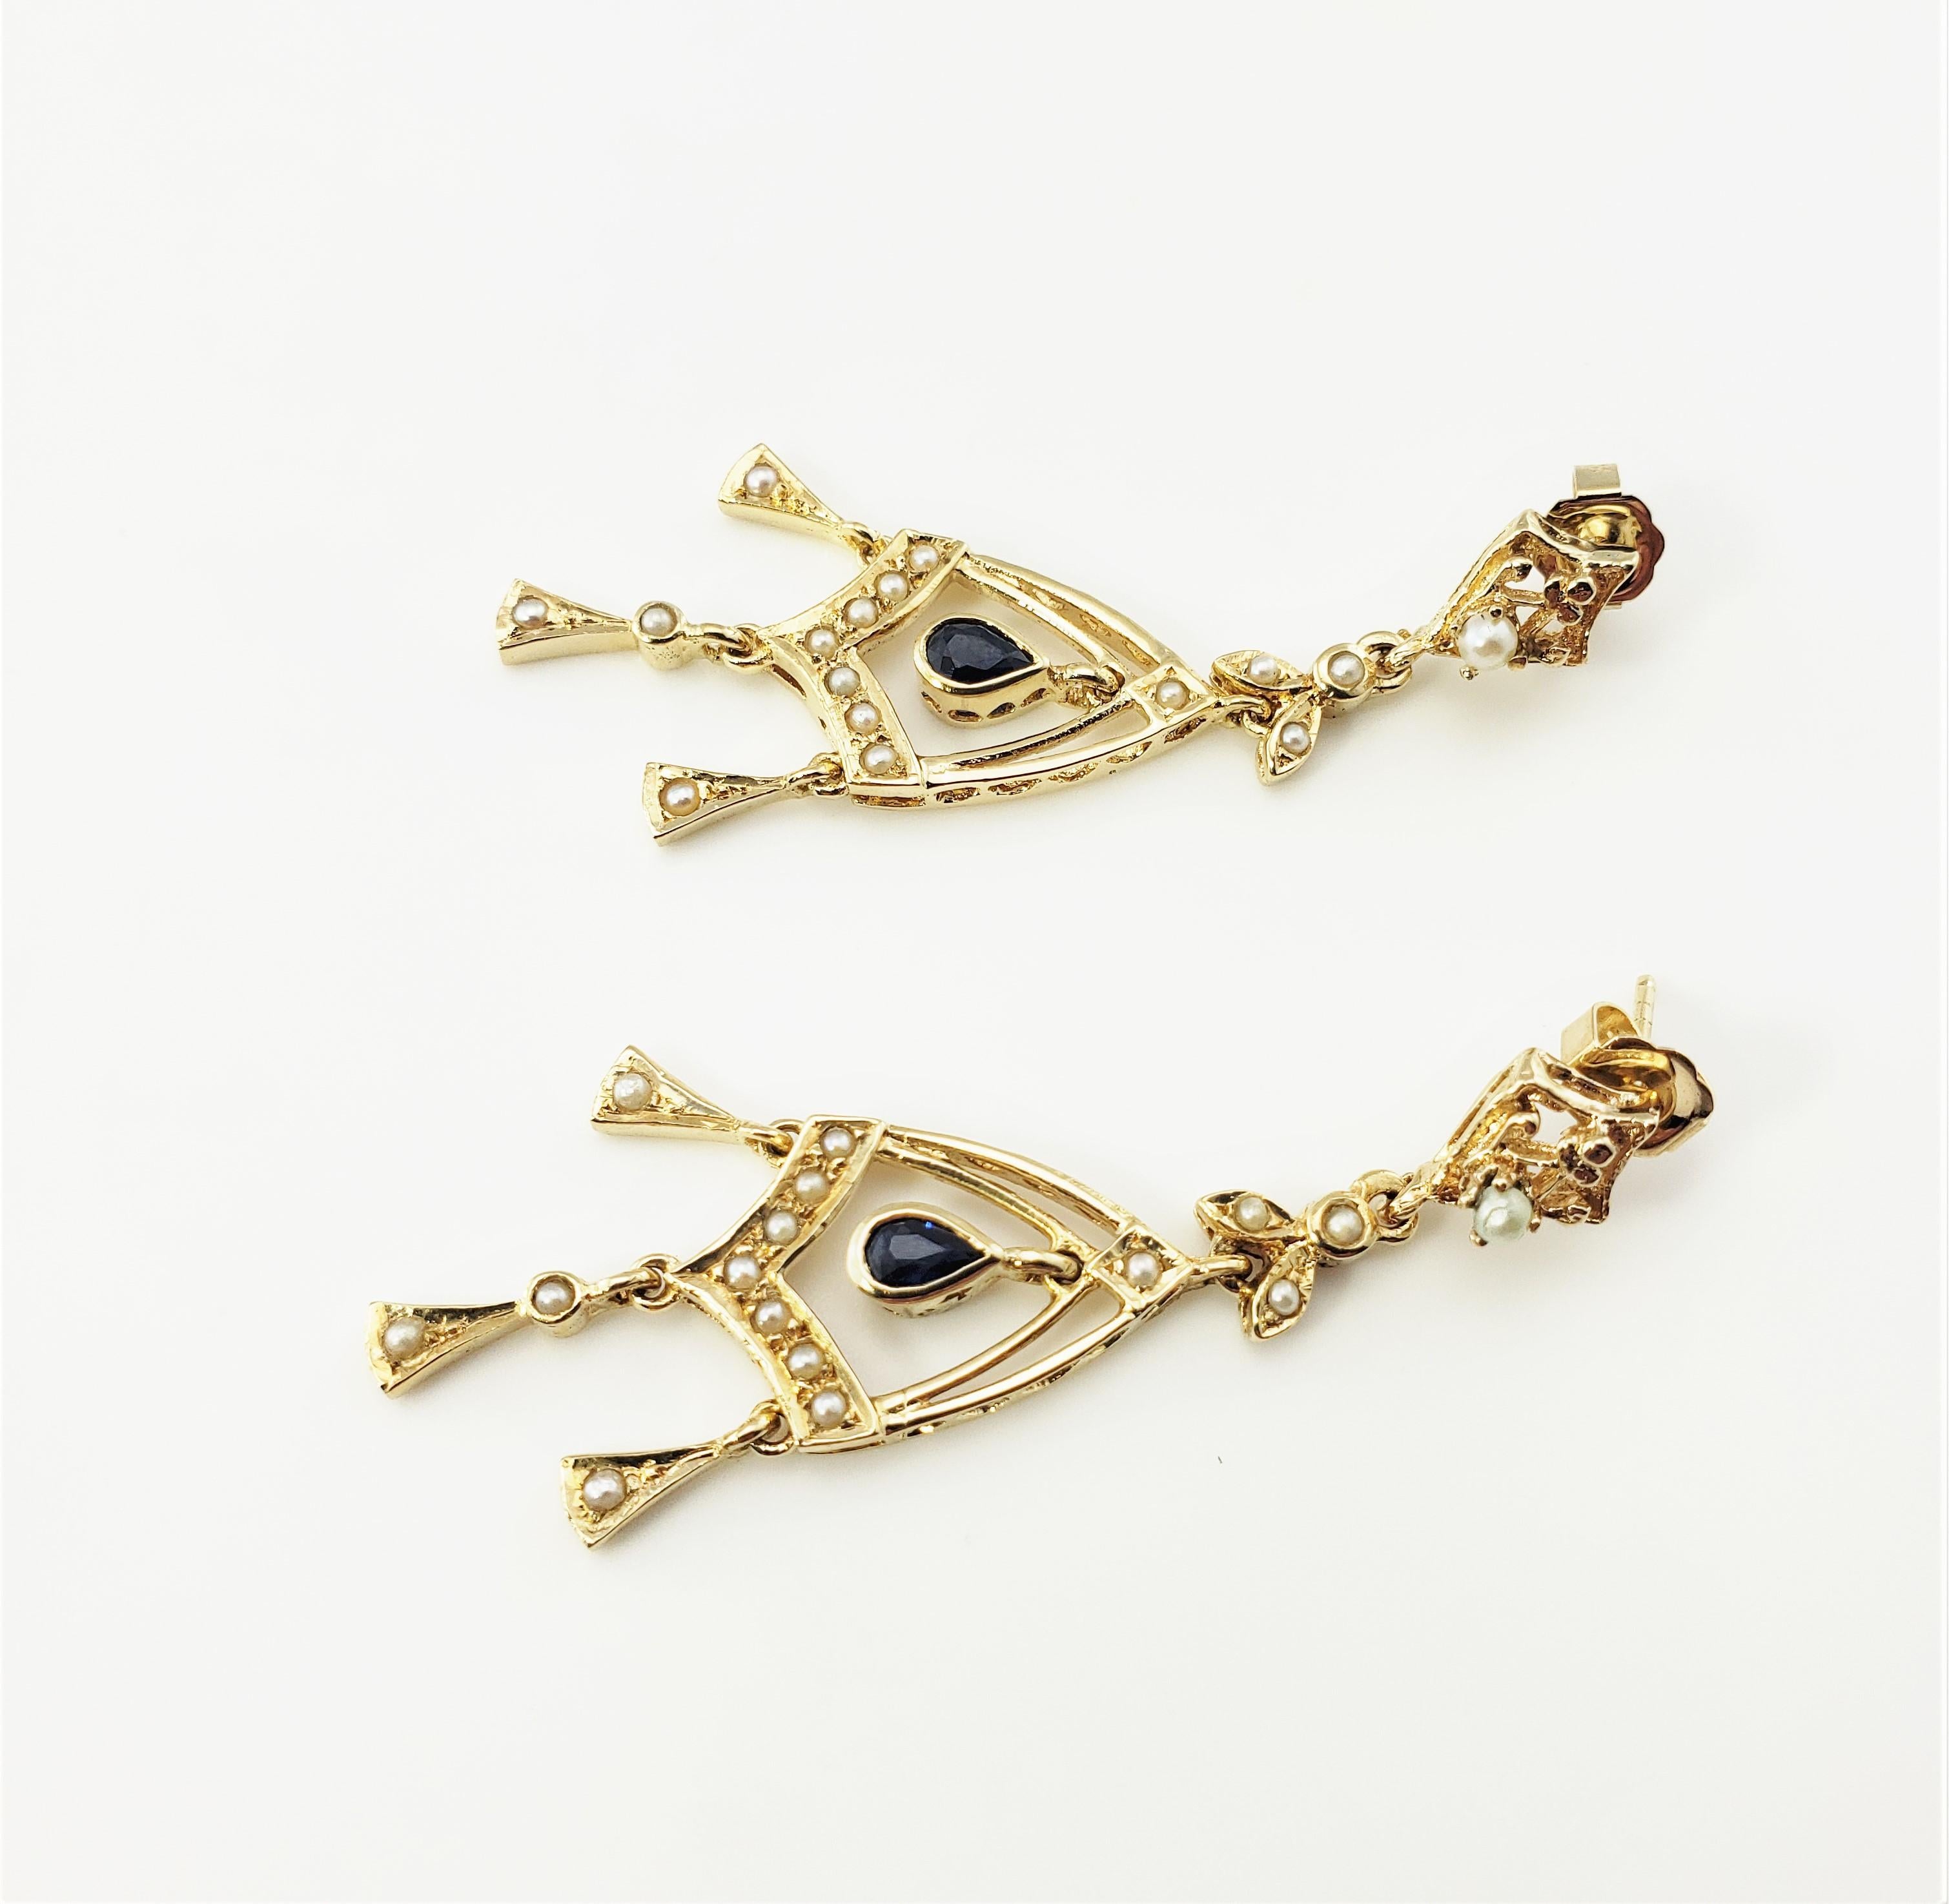 14 Karat Yellow Gold Diamond and natural Sapphire Dangle Chandelier Earrings-

These elegant chandelier earrings each feature one pear shaped sapphire (5 mm x 4 mm) and 16 seed pearls set in classic 14K yellow gold.  Push back closures.

Size:  1.9